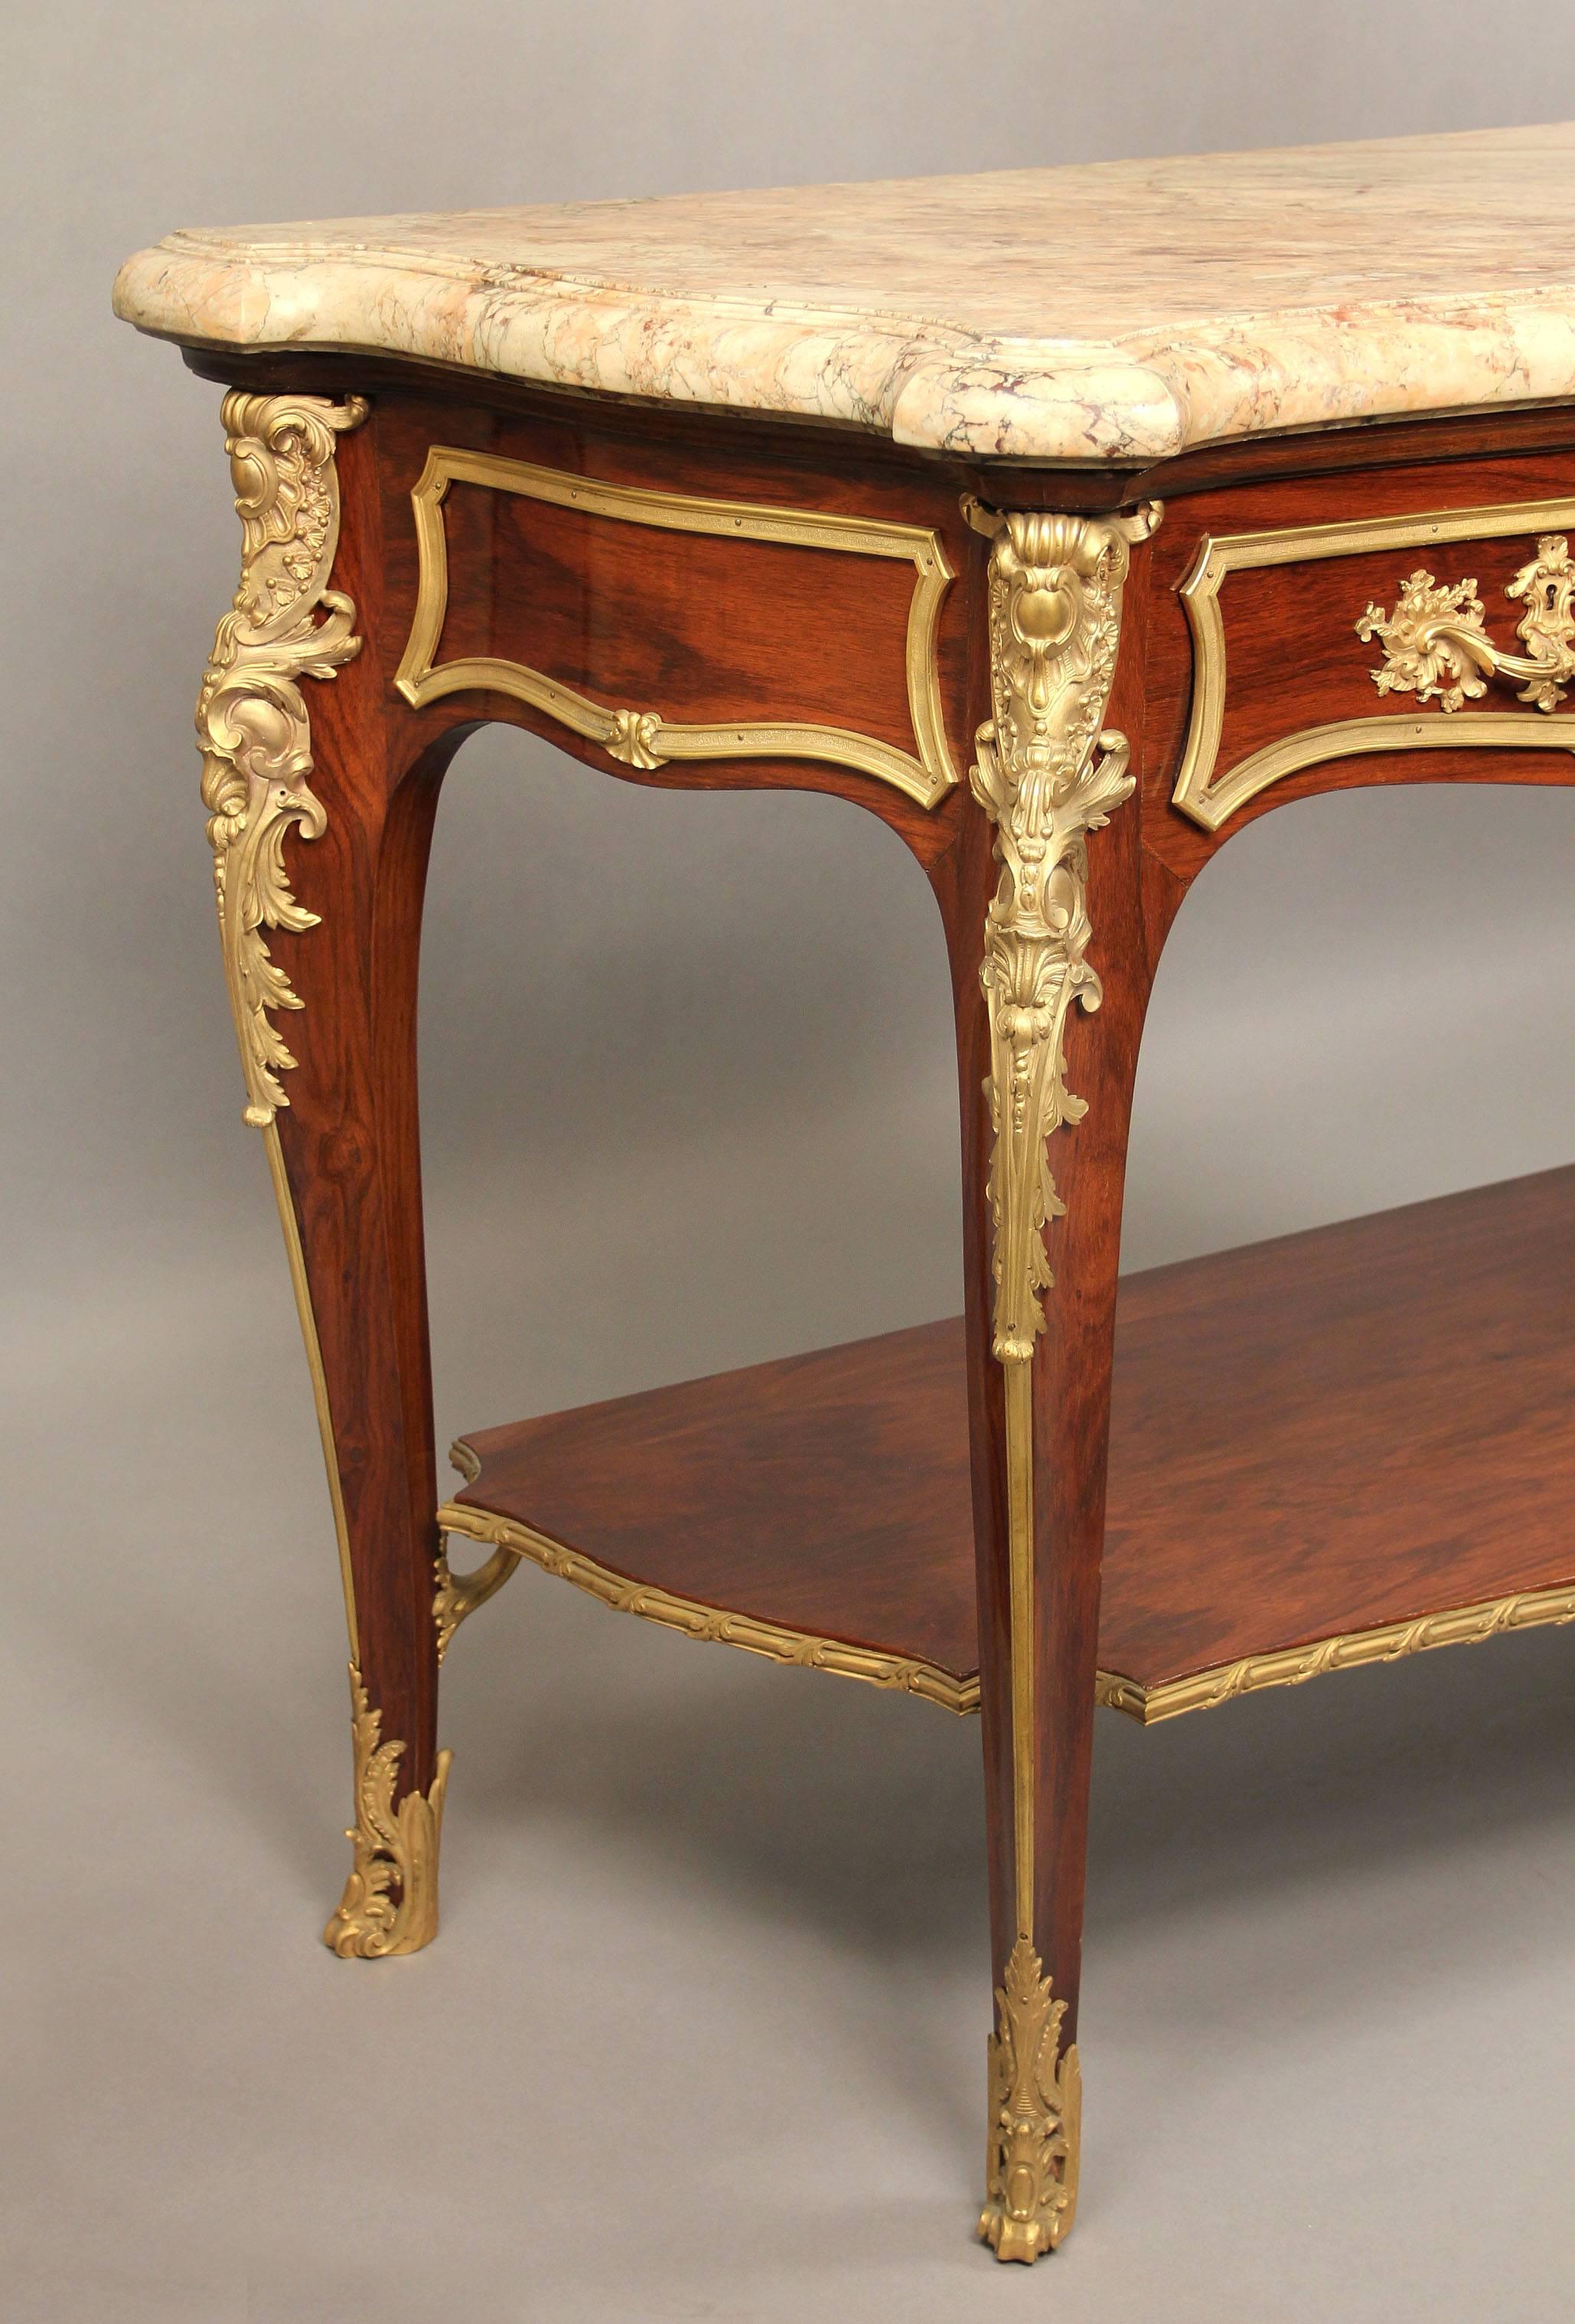 An extremely fine late 19th century Louis XV style gilt bronze-mounted server or console.

The shaped marble-top above two drawers, the bronze-mounted tapering legs joined by a bronze-mounted shelf.